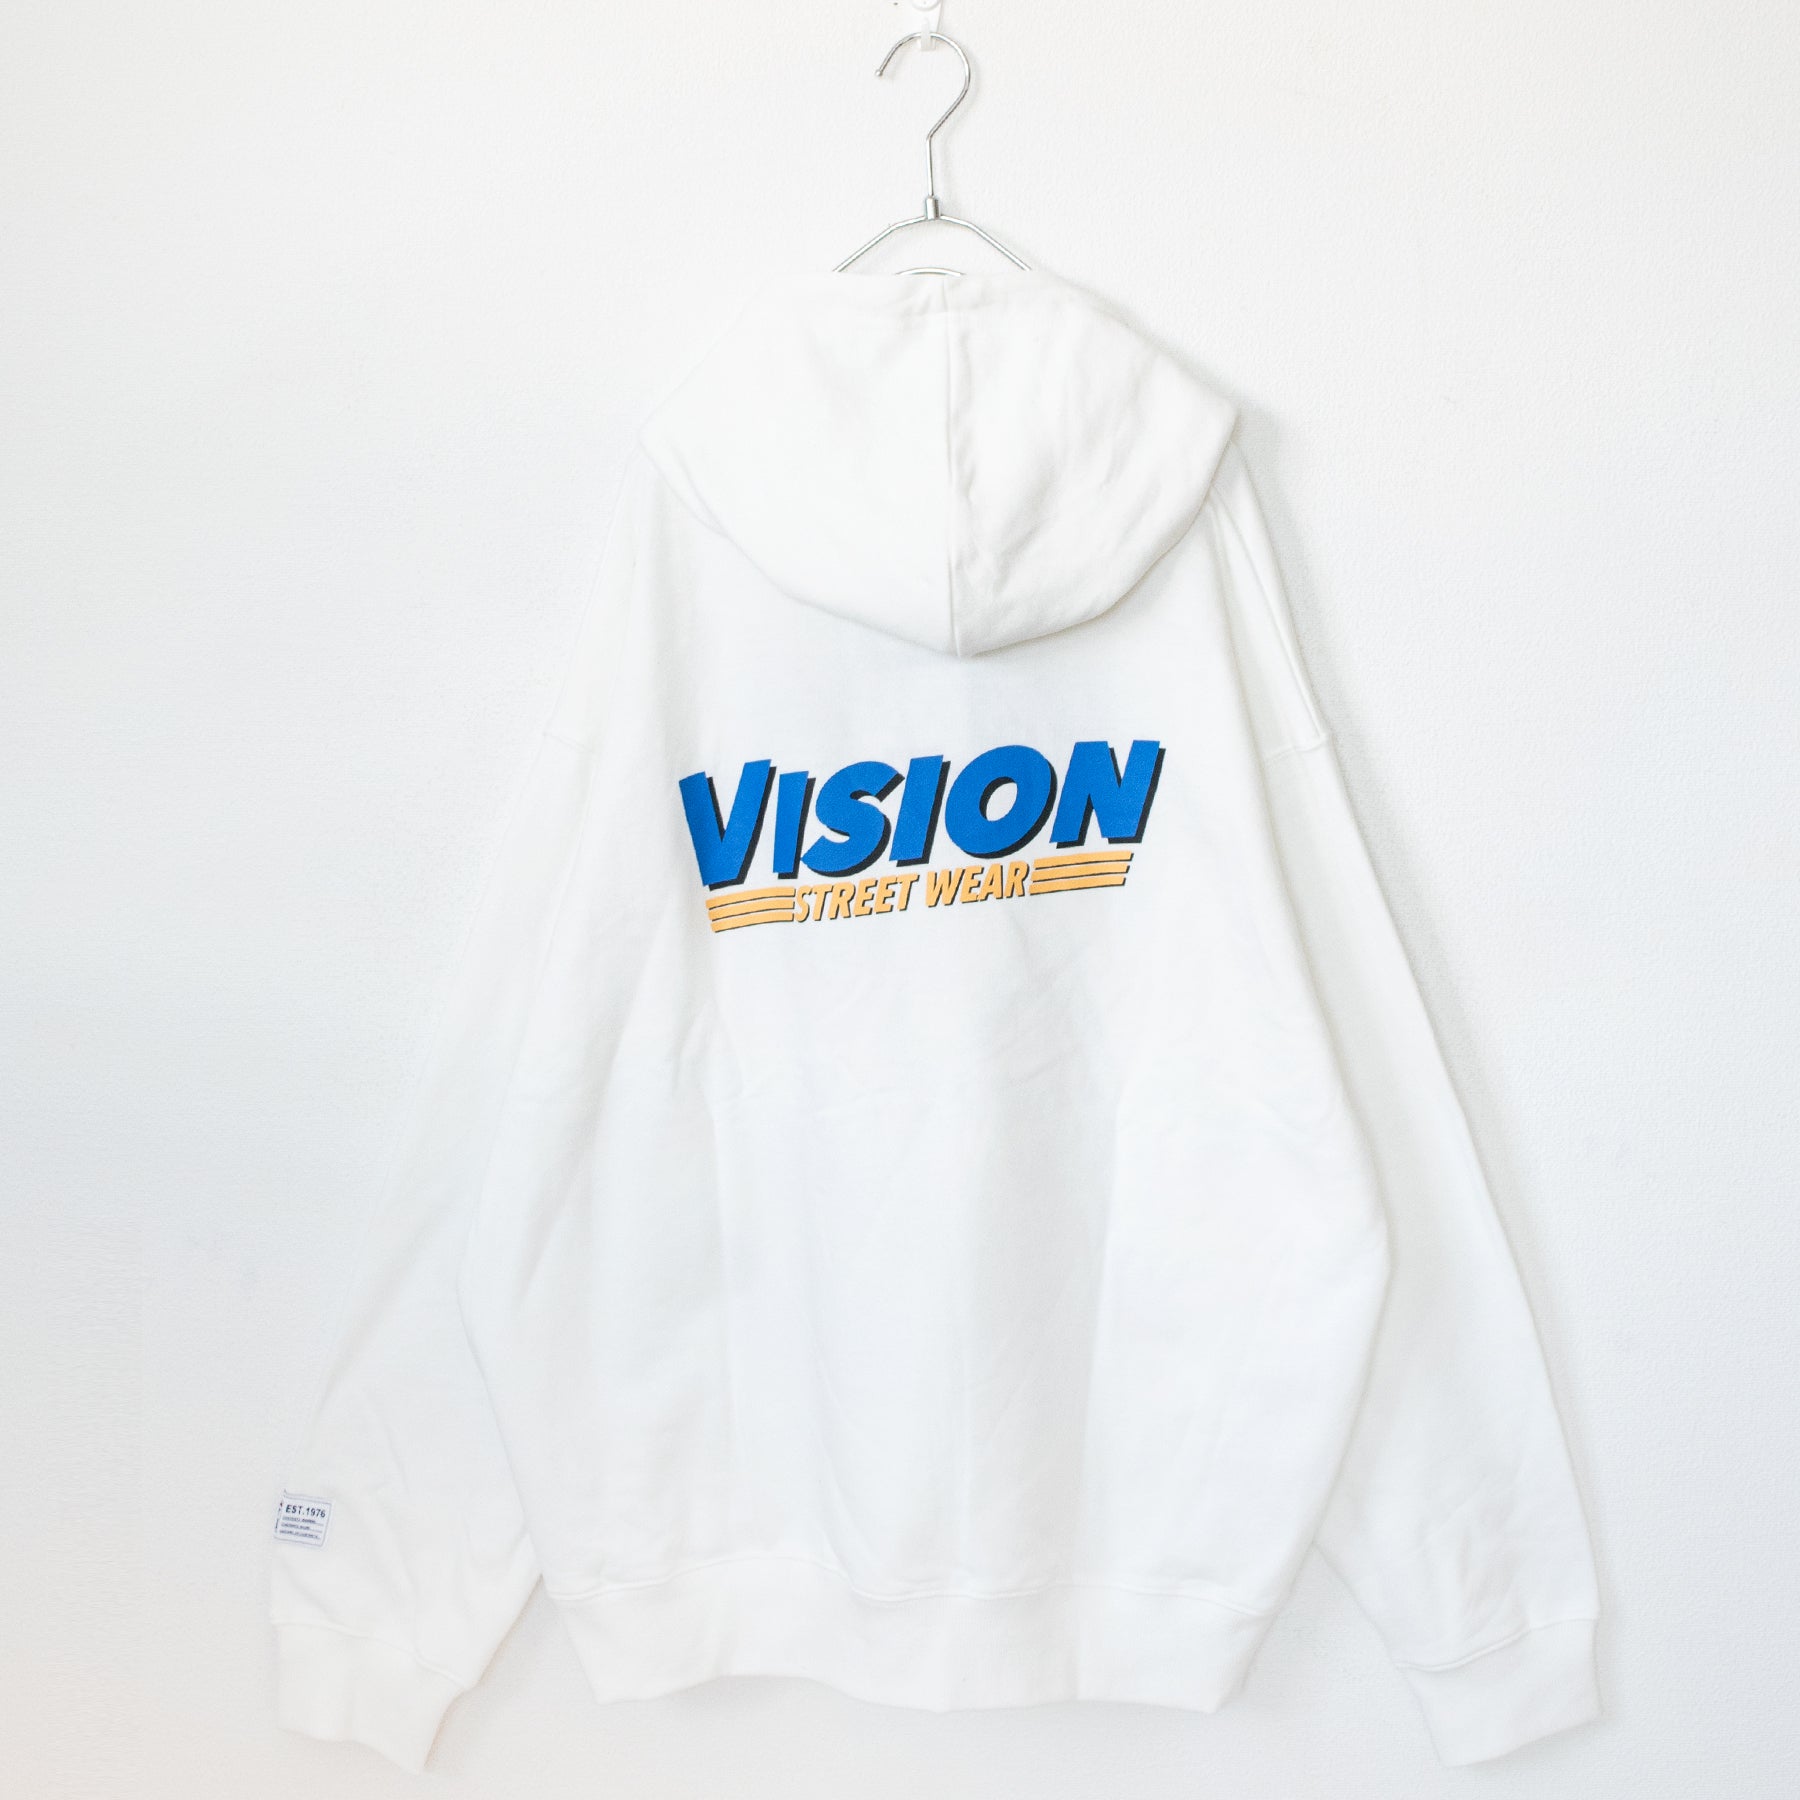 VISION STREET WEAR Skateboard Logo Print Pullover Hoodie - YOUAREMYPOISON